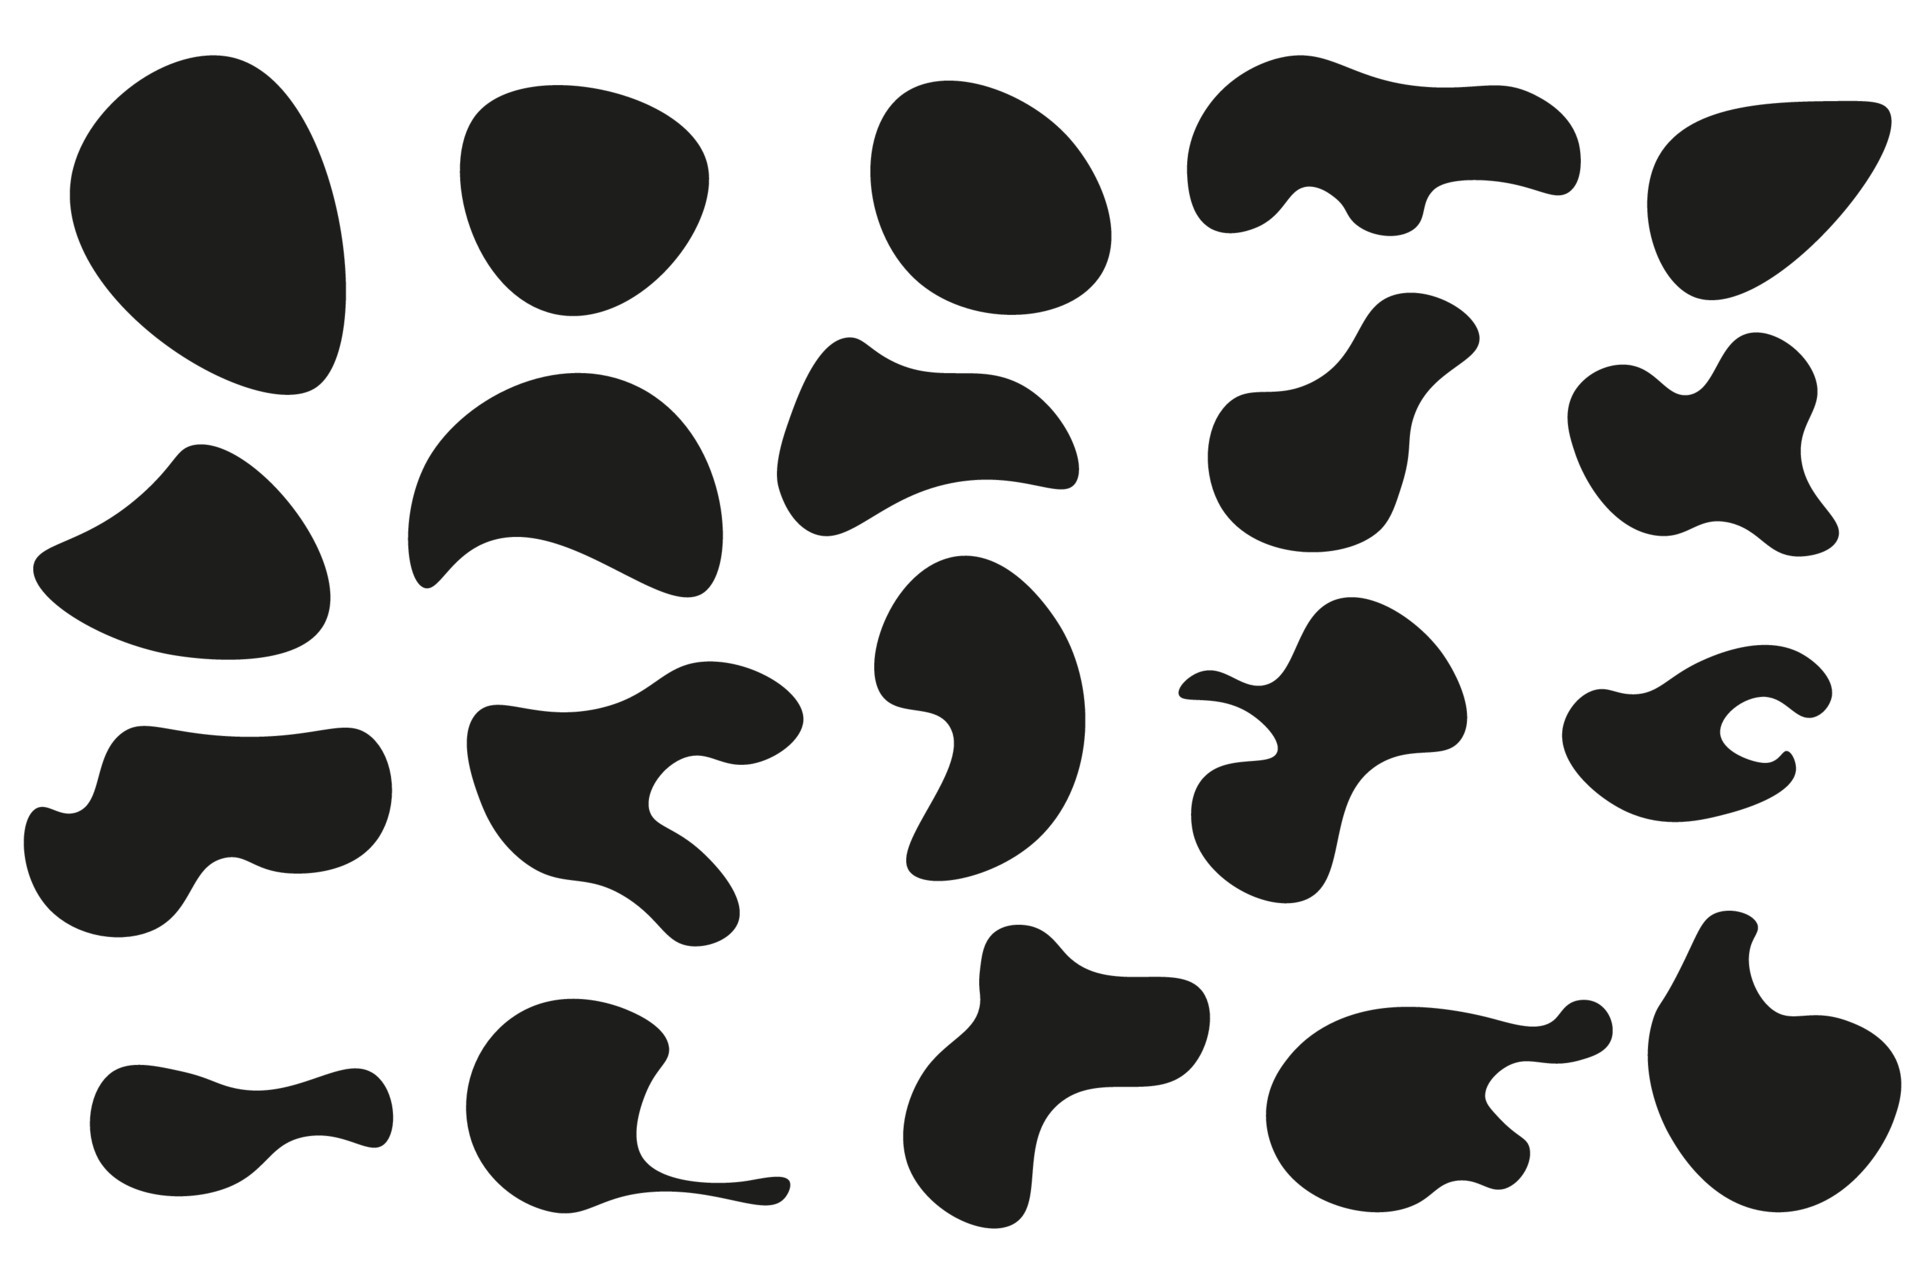 https://static.vecteezy.com/system/resources/previews/003/689/195/original/organic-black-blob-with-irregular-shape-abstract-blotches-ink-smudges-and-pebble-silhouettes-simple-liquid-amorphous-splodge-elements-make-up-a-creative-minimal-bubble-rock-set-free-vector.jpg